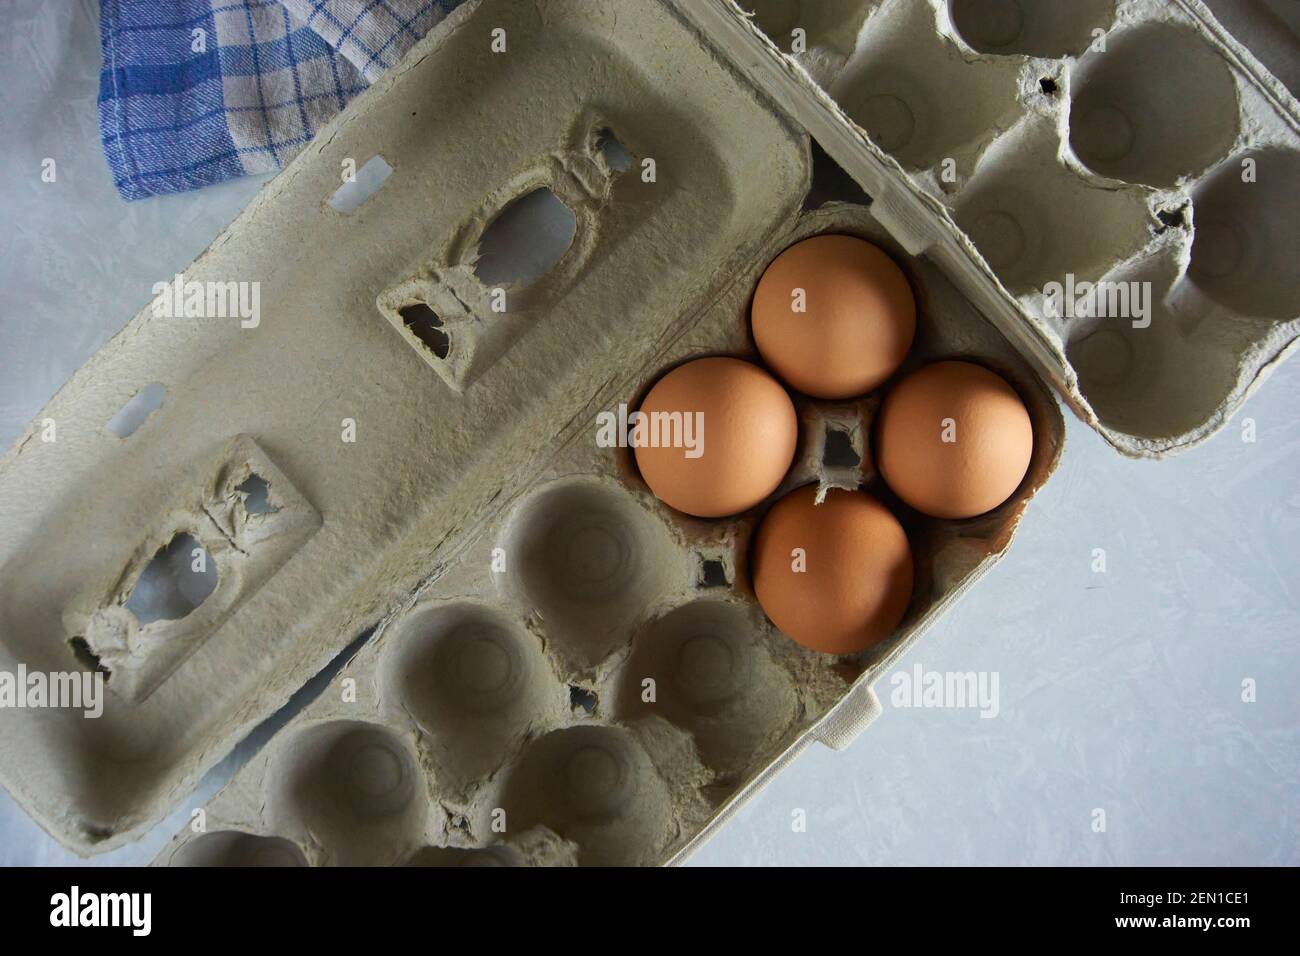 Organic brown eggs in containers. Stock Photo